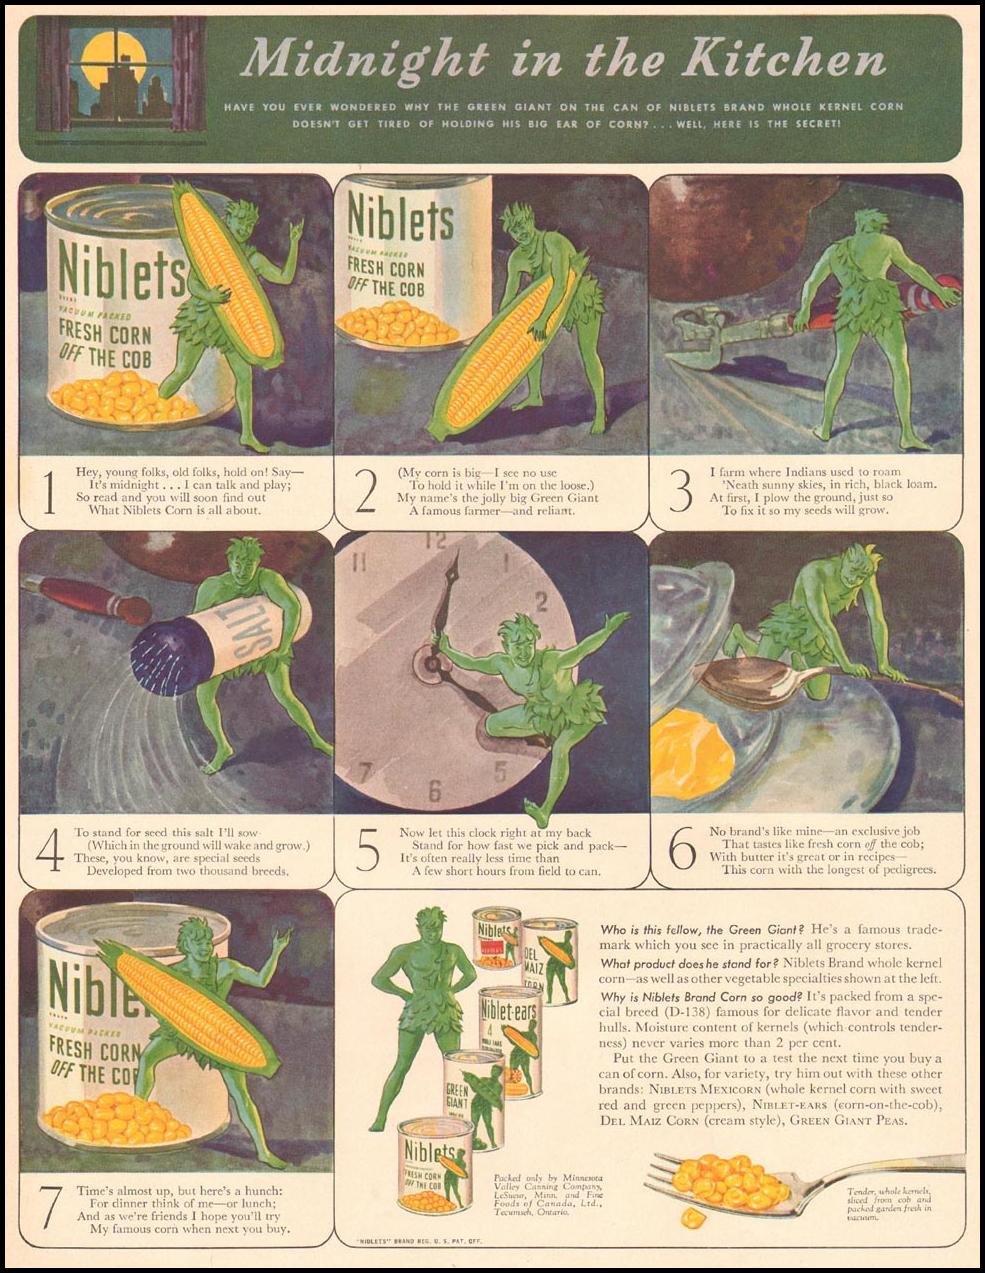 NIBLETS BRAND CANNED CORN
LIFE
12/16/1940
p. 59